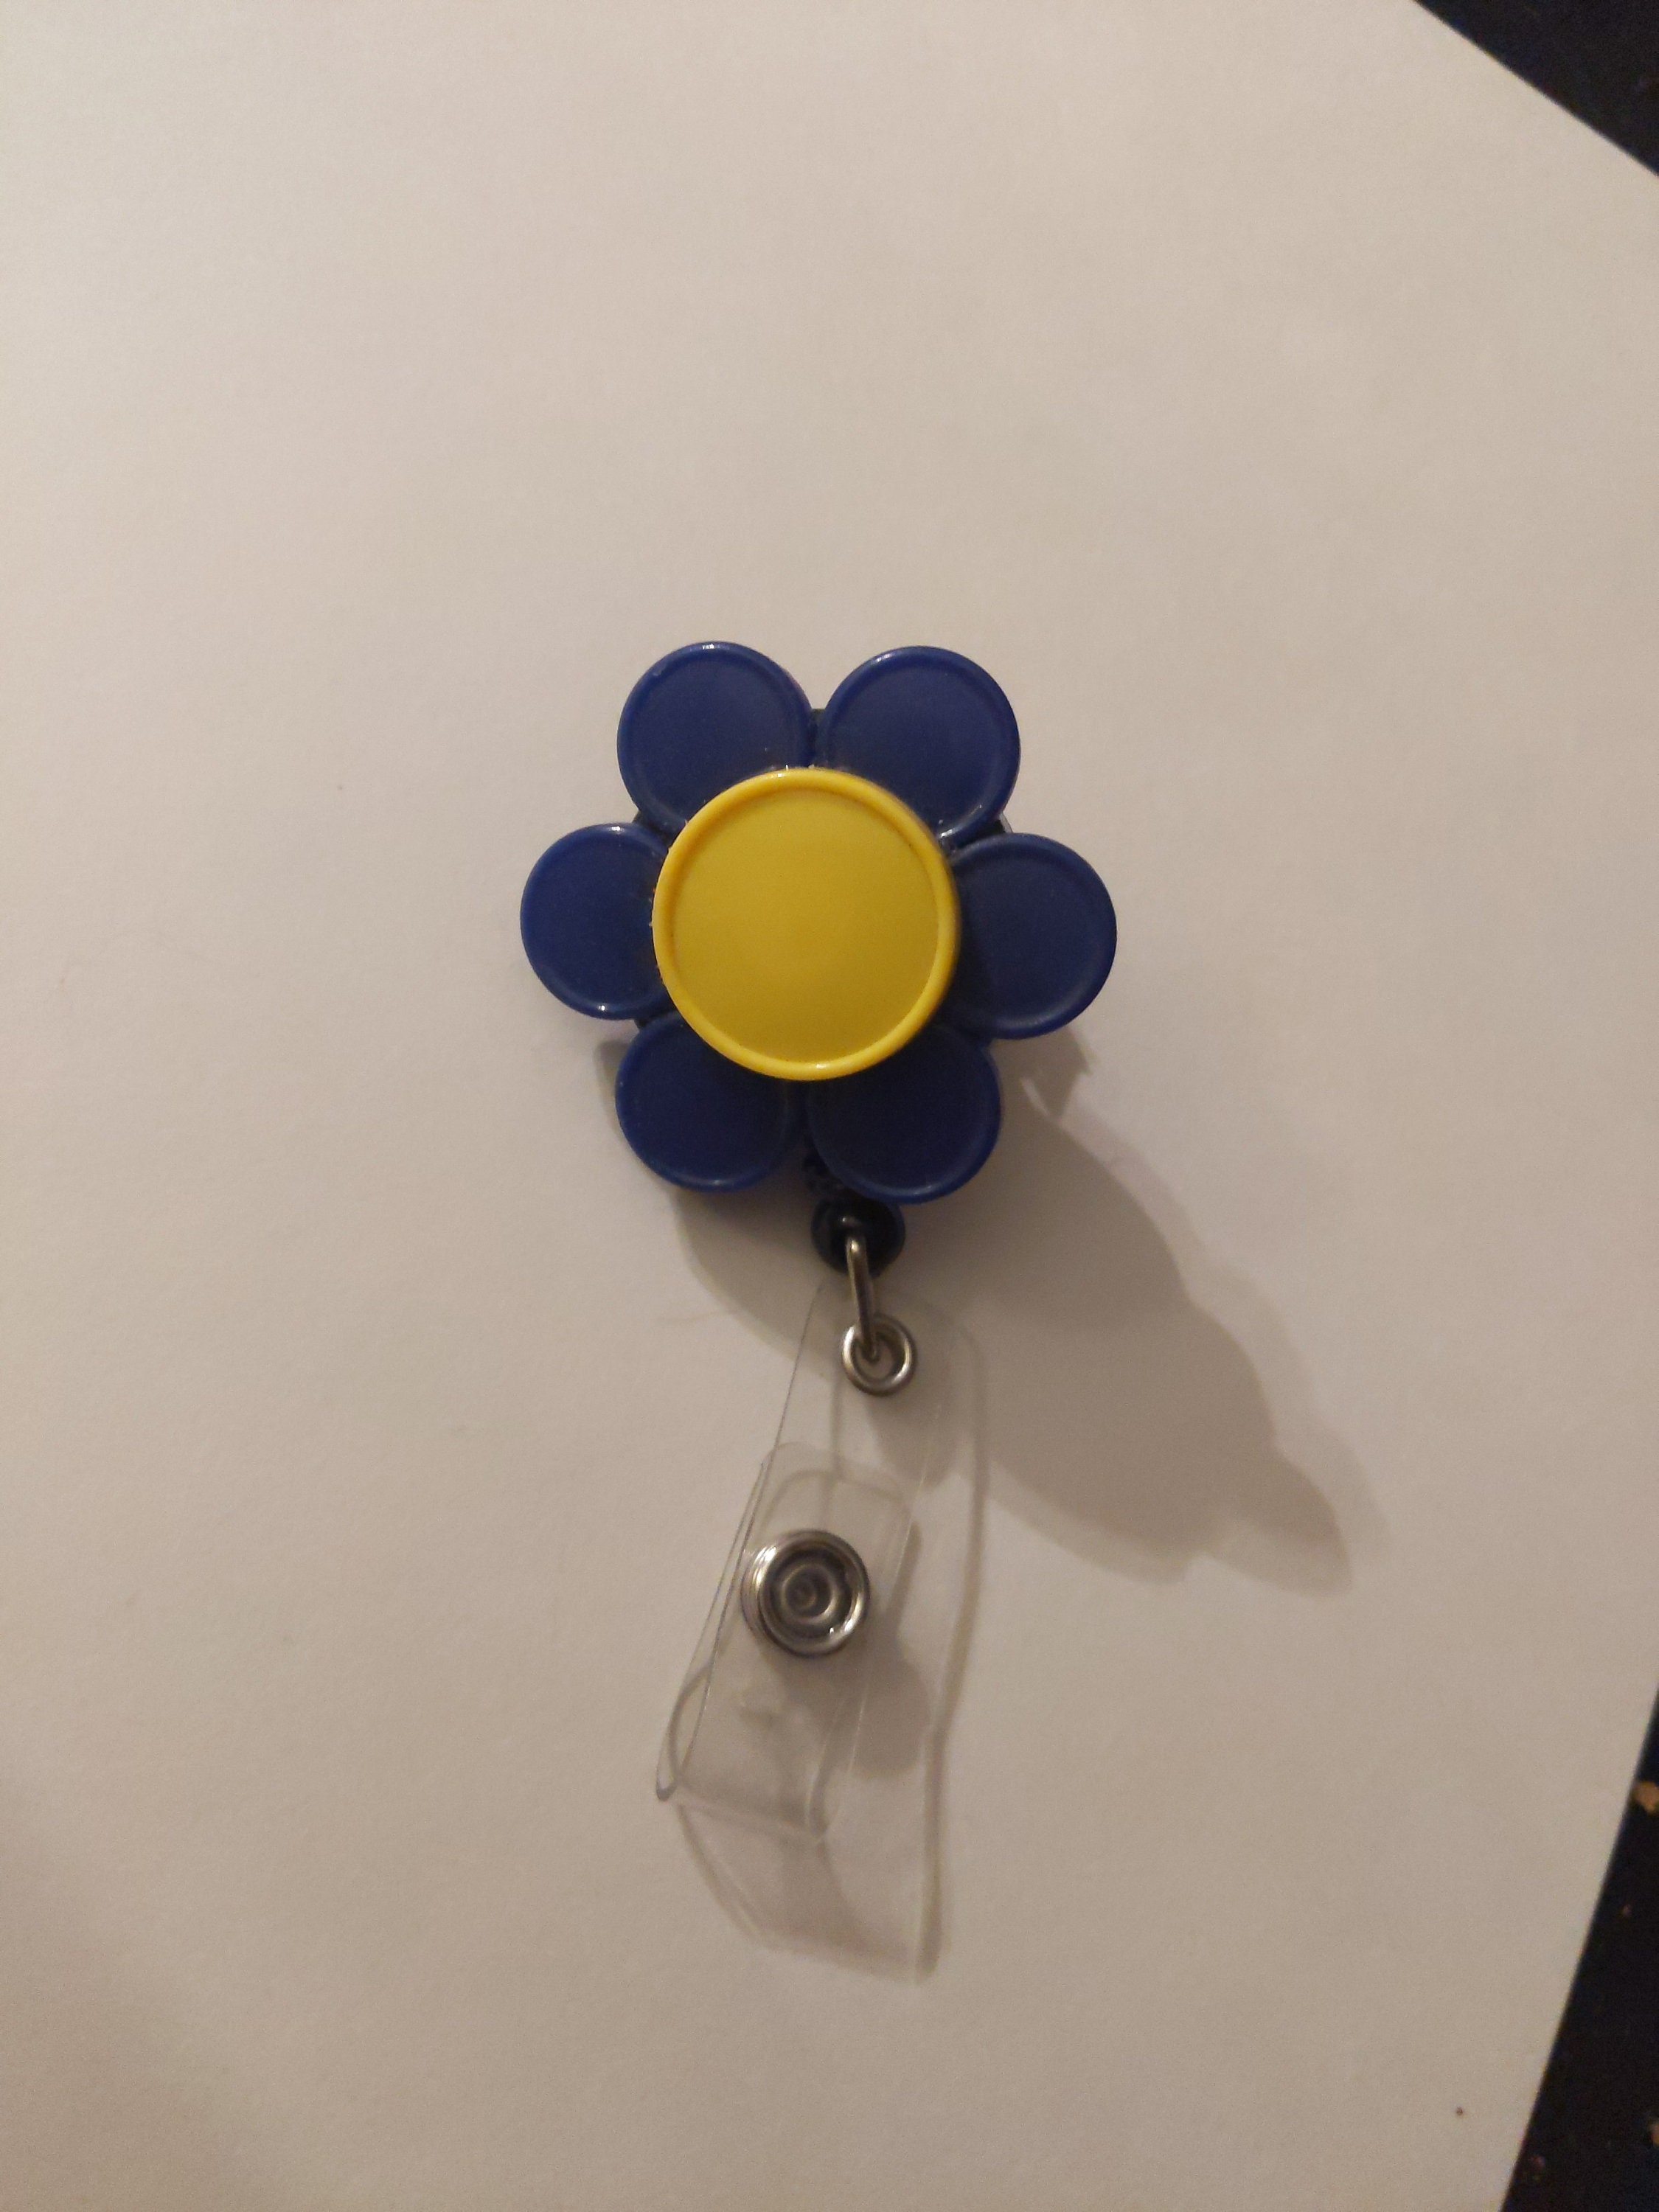 Retractable name badge holder made out of recycled flip off medicine caps.